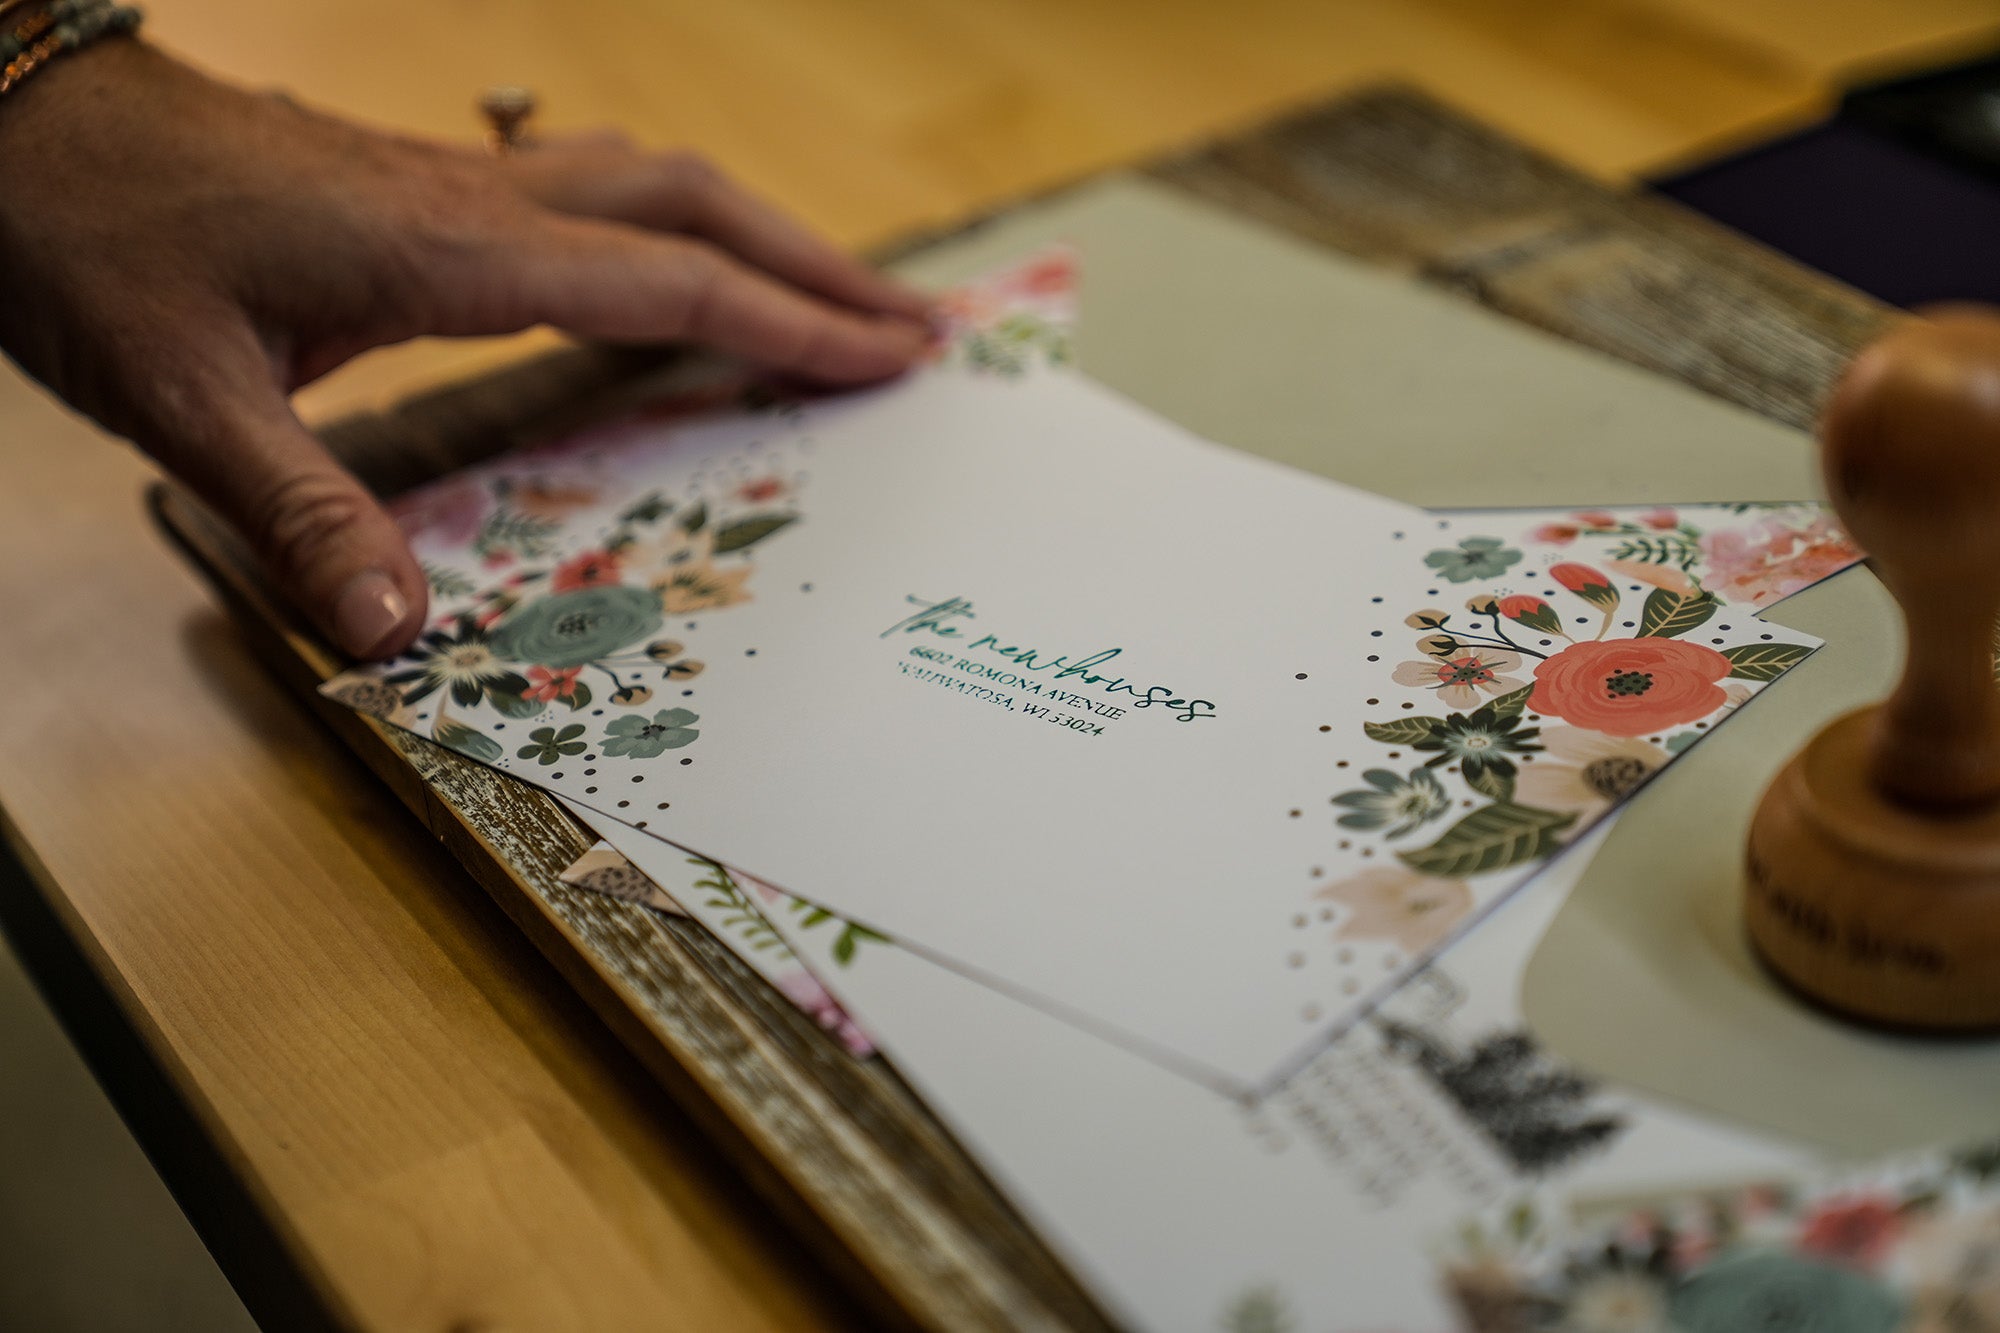 Hand of a person carefully preparing a decorative paper with floral patterns for custom stamping with a clear focus on the paper and the stamp ready for use on the side